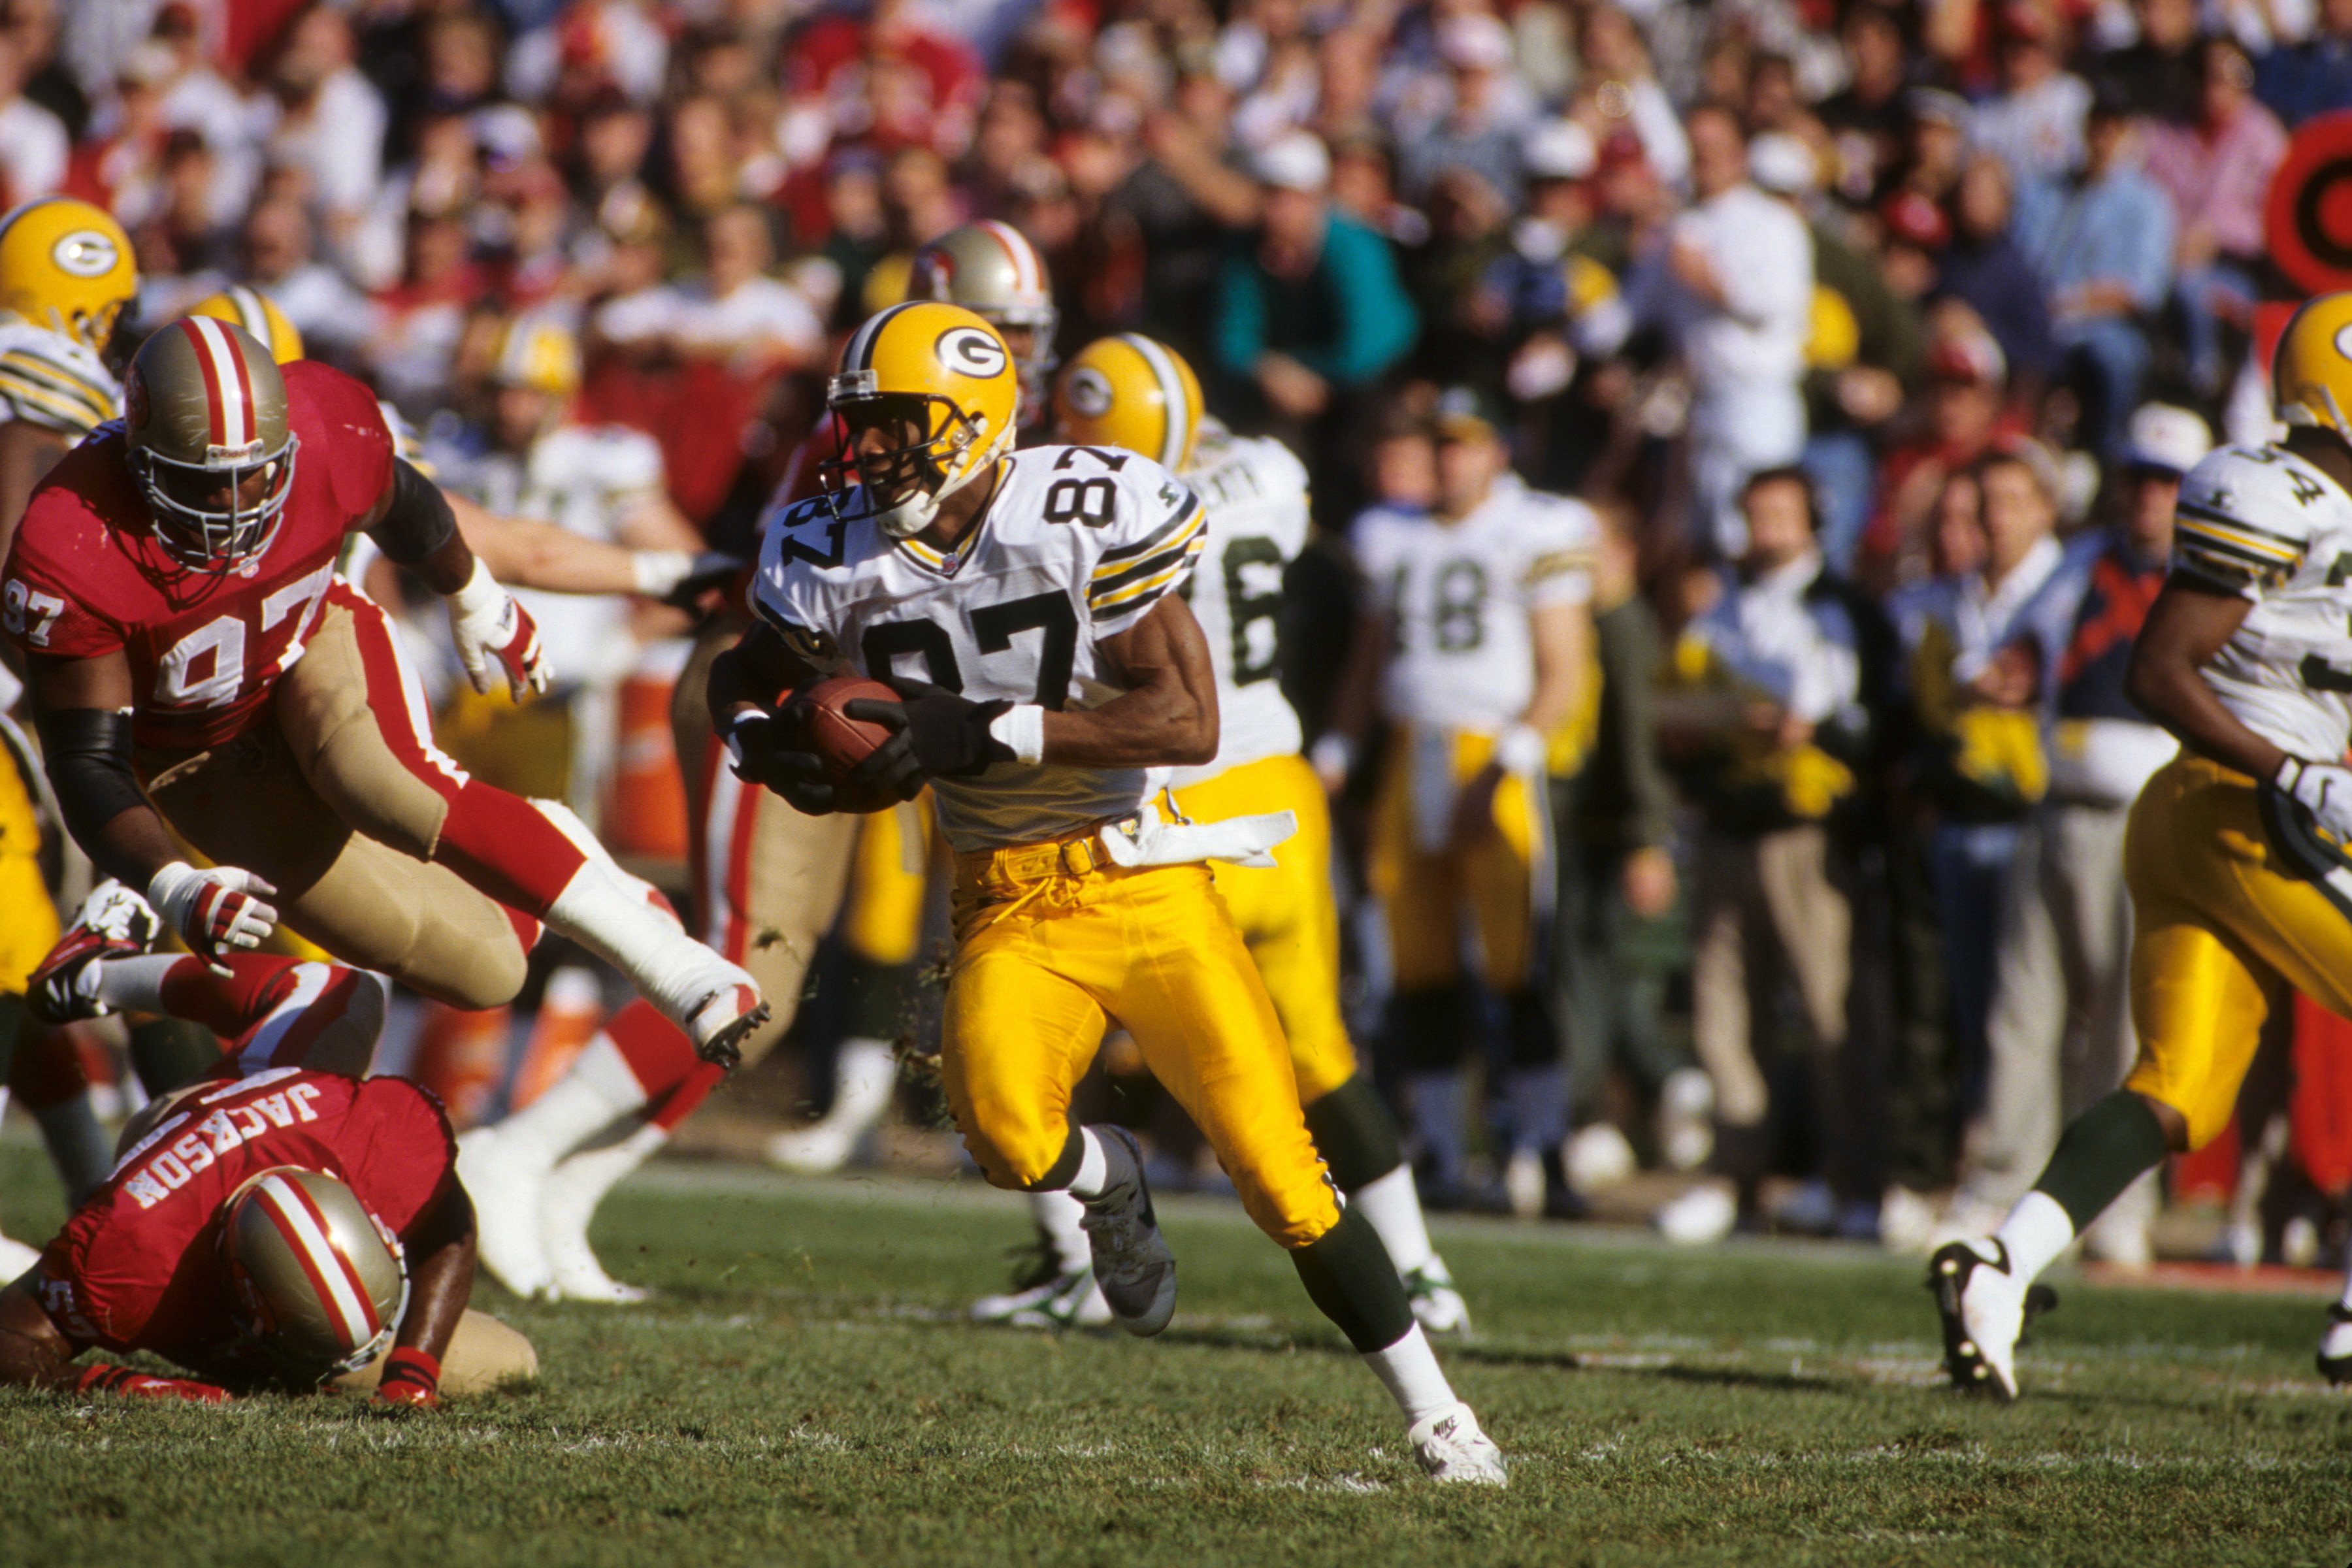 San Francisco 49ers vs Green Bay Packers (Round 9): The most